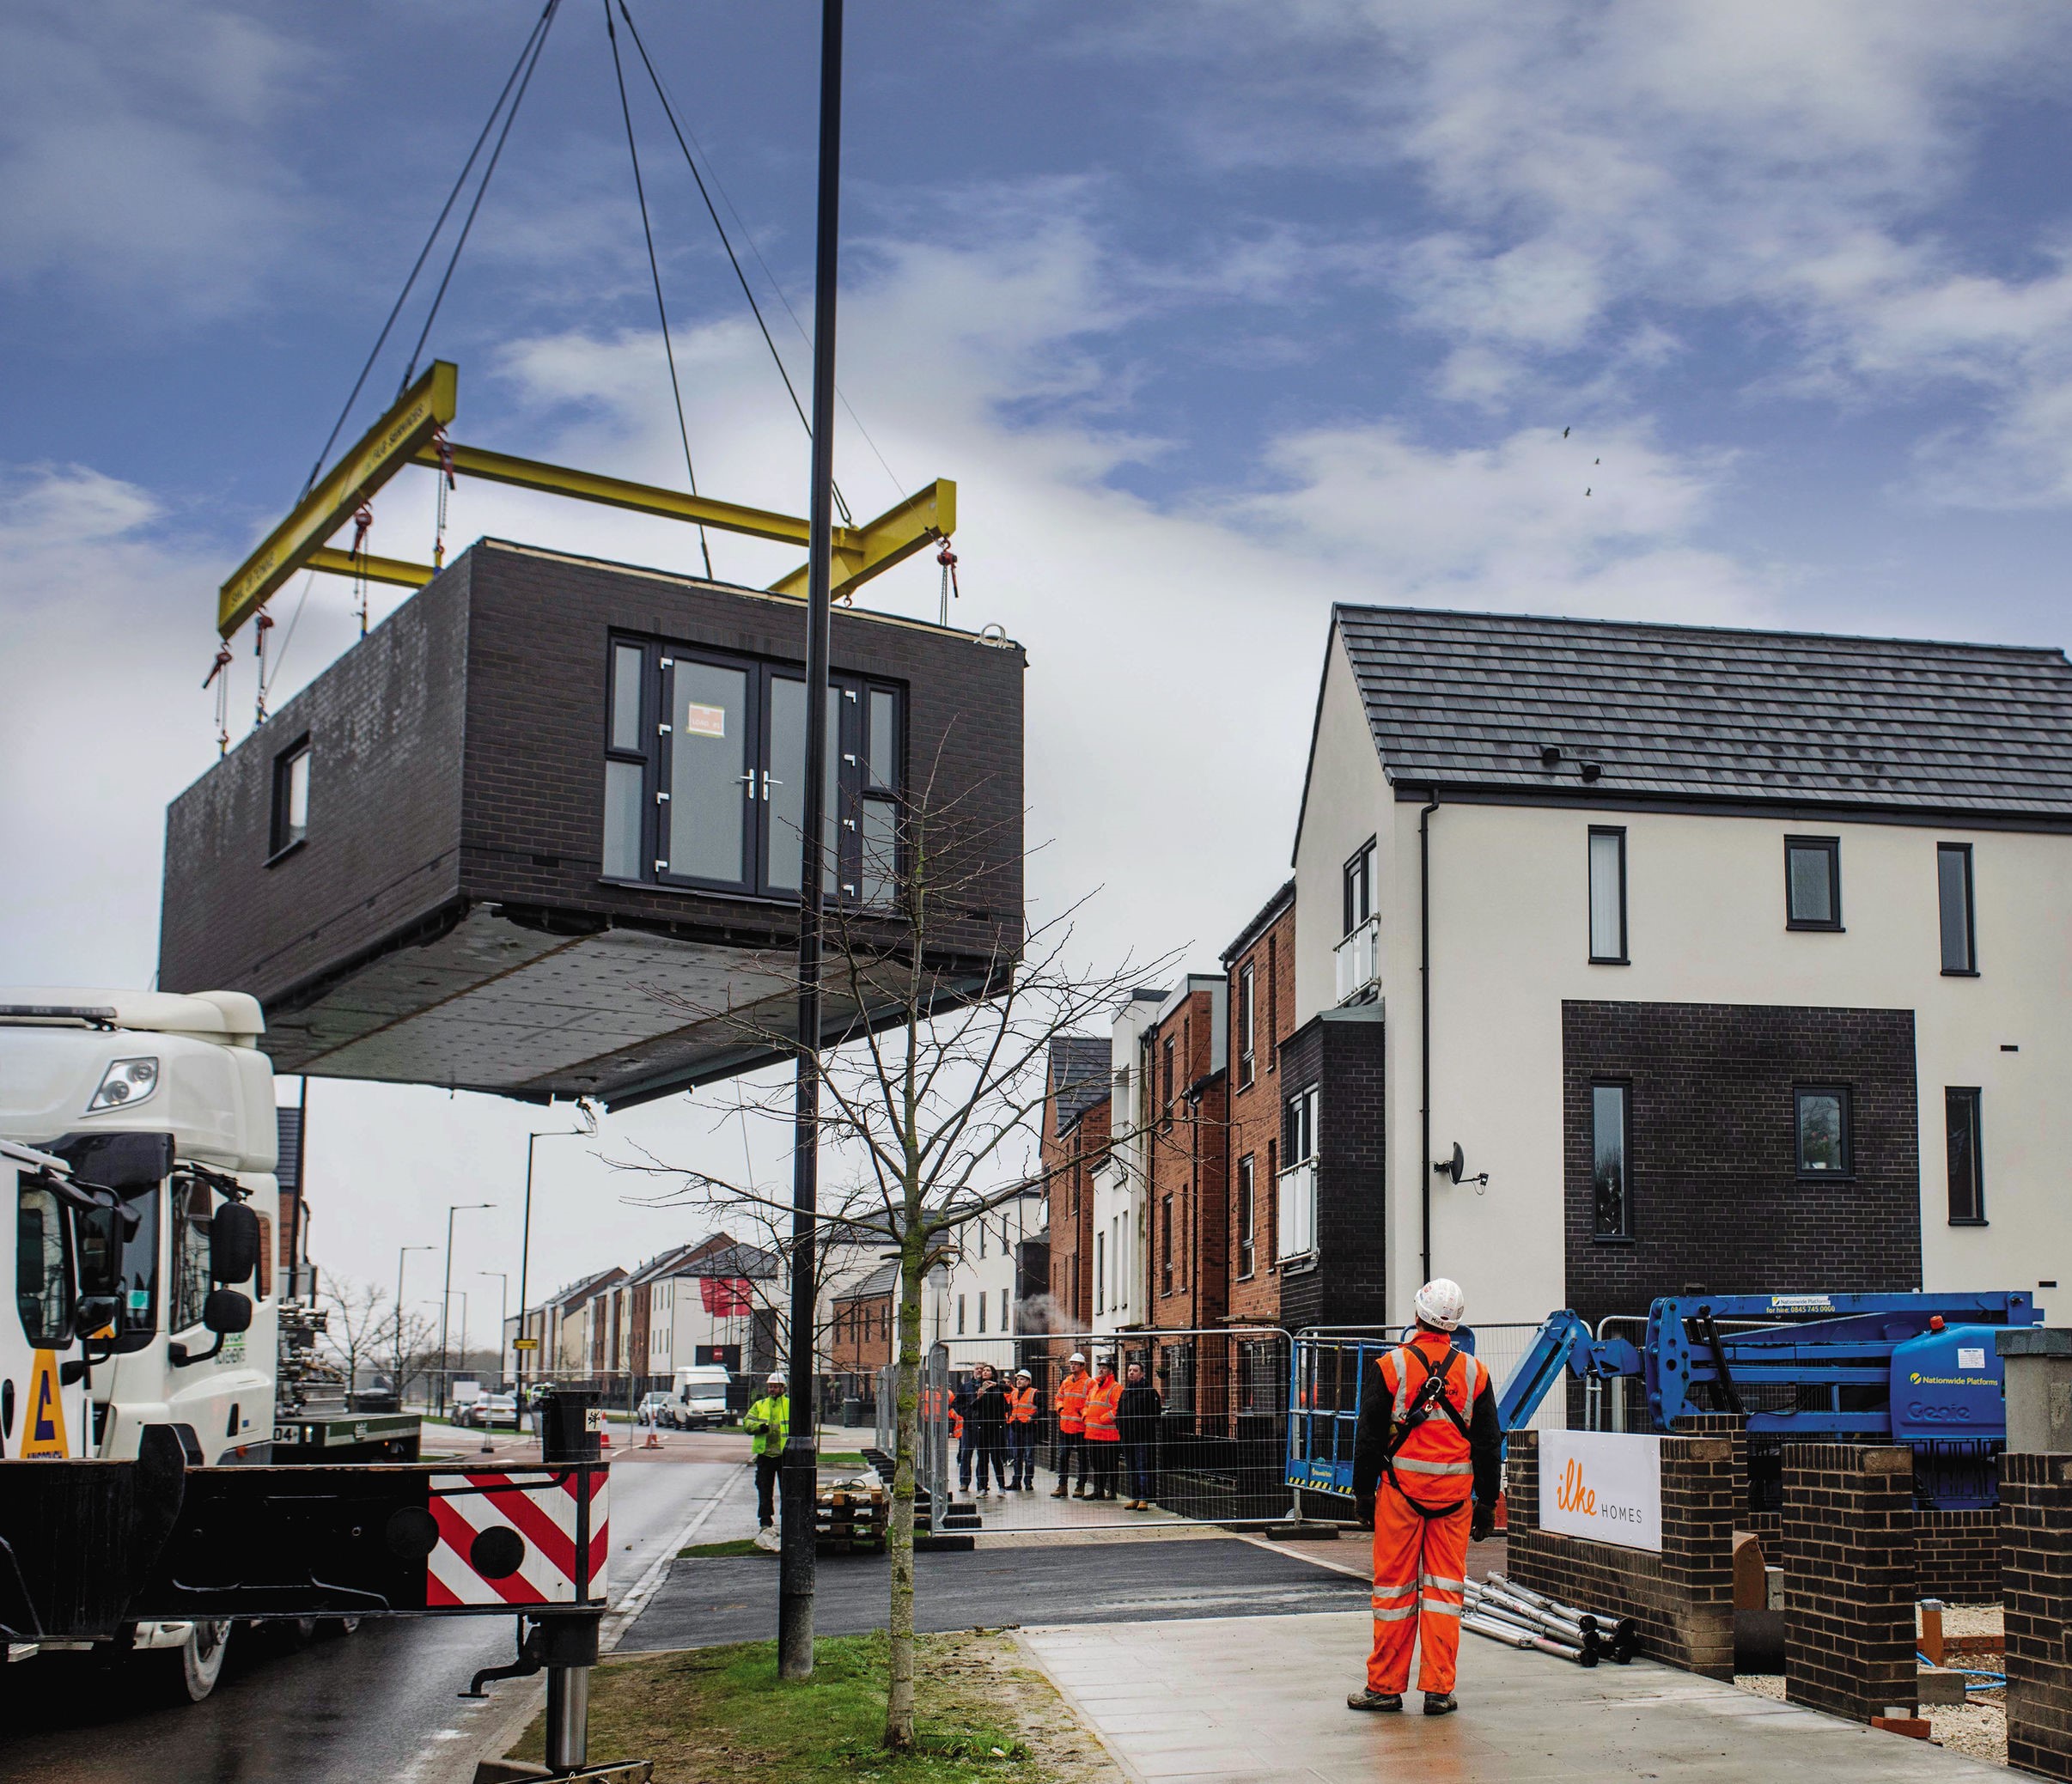 Prefabs sprouting: Modern Methods of Construction and the English housing crisis | School of Civil Engineering | University of Leeds